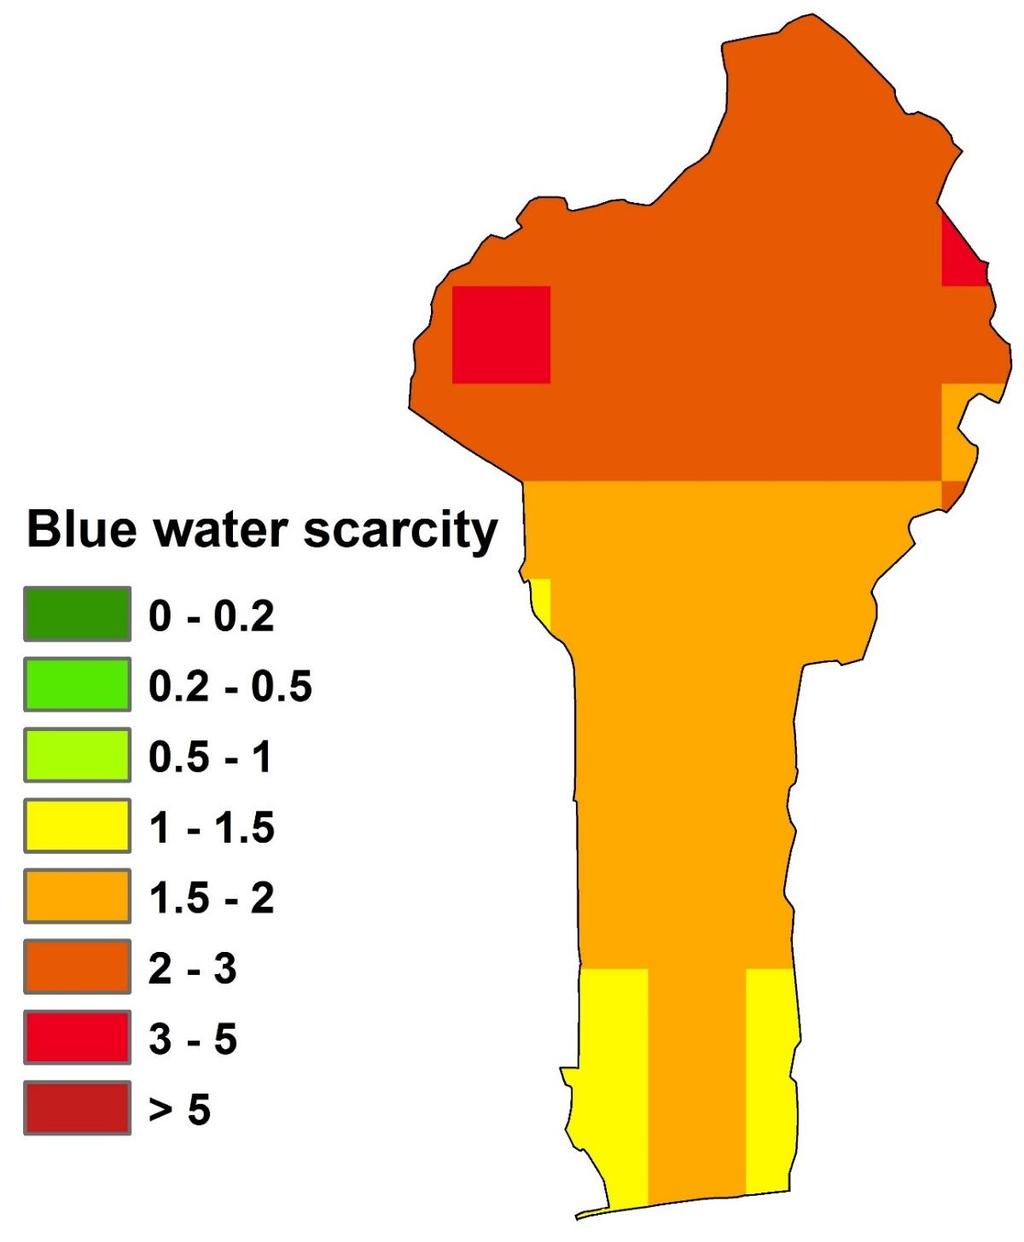 Source: Mekonnen and Hoekstra (2016) Benin faces moderate (yellow) to significant (orange) and severe (red) levels of annual average blue water scarcity.